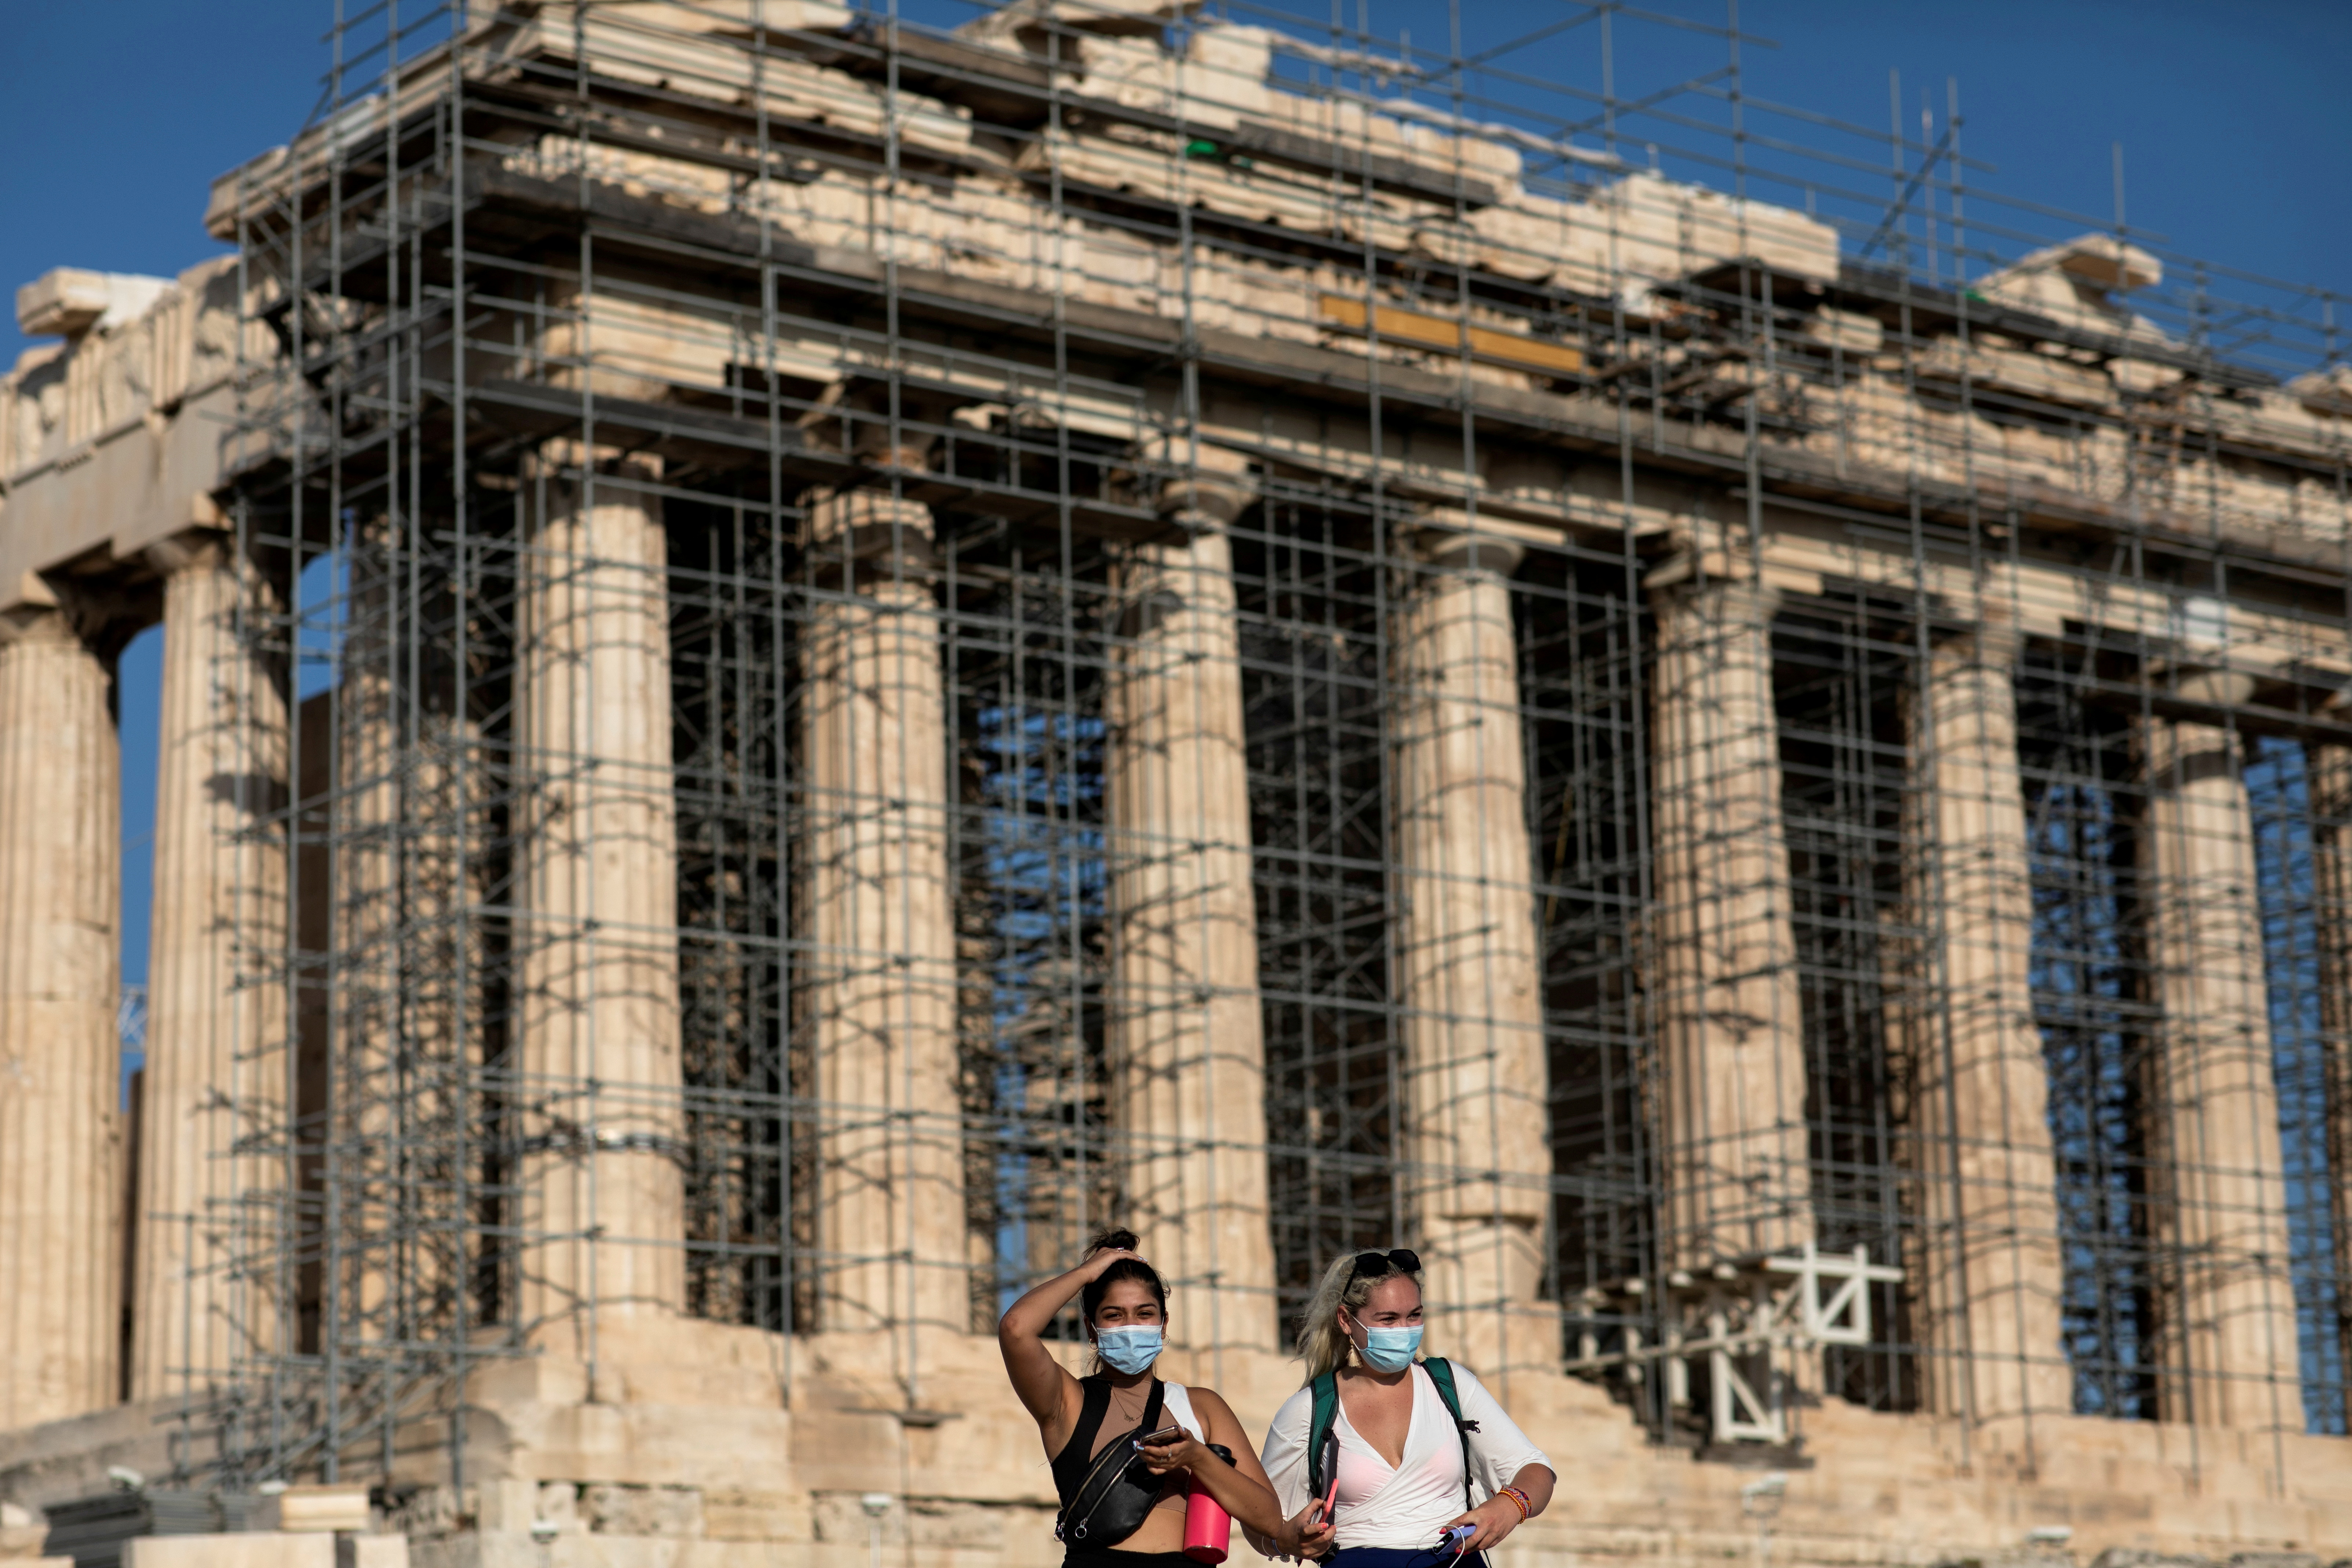 People visit the Parthenon temple atop the Acropolis hill in Athens